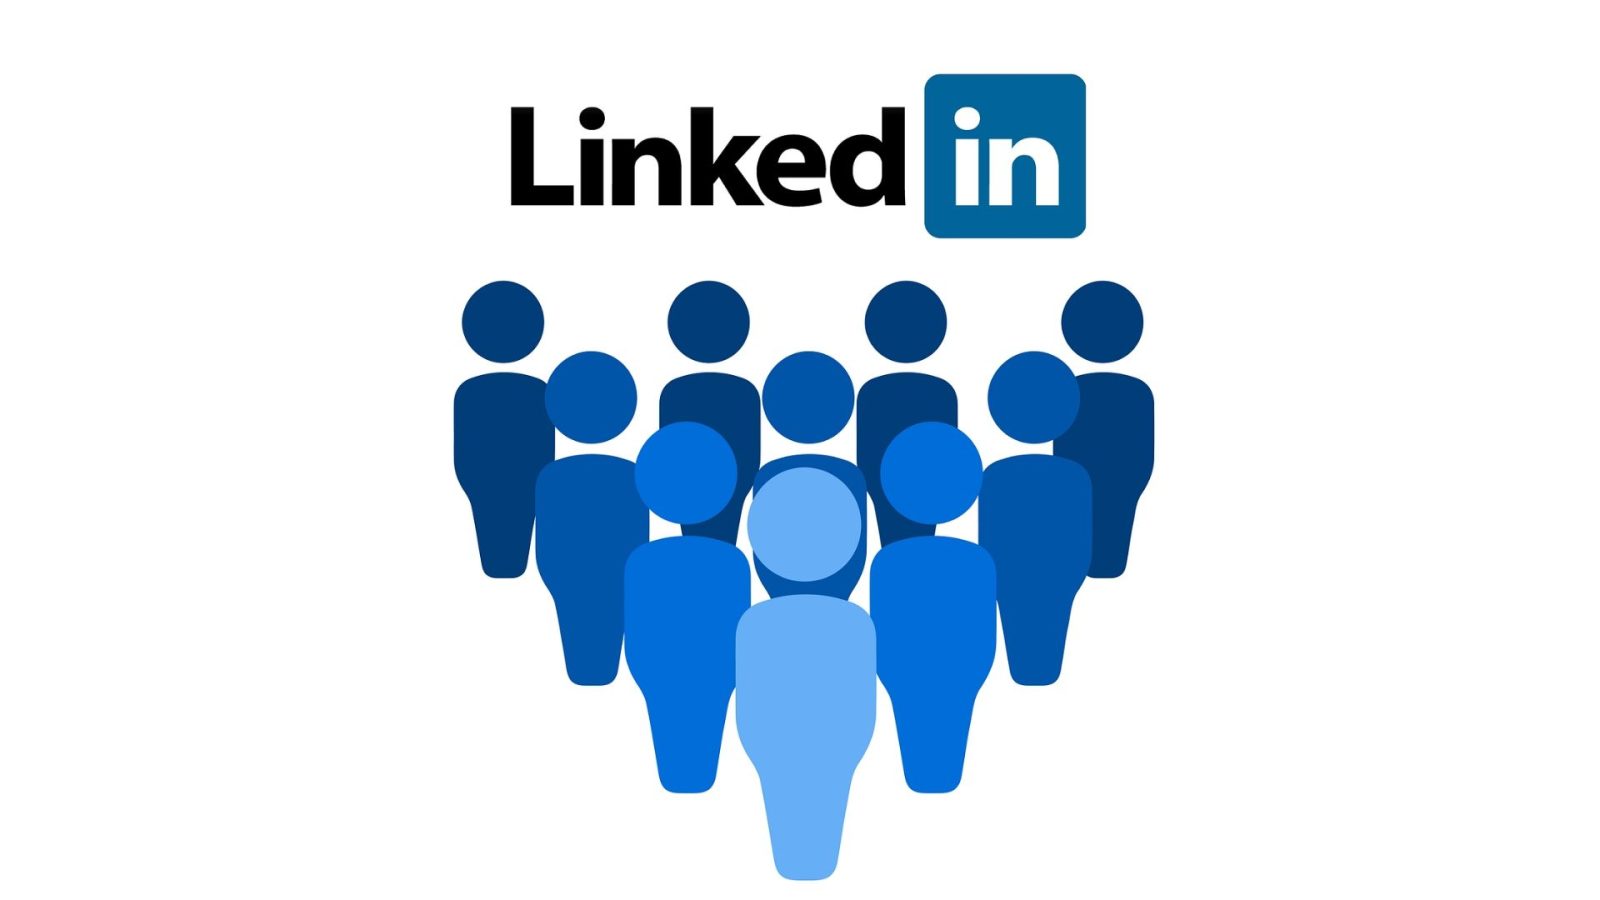 15 LinkedIn Growth Hacks to boost your Lead Generation in 2023